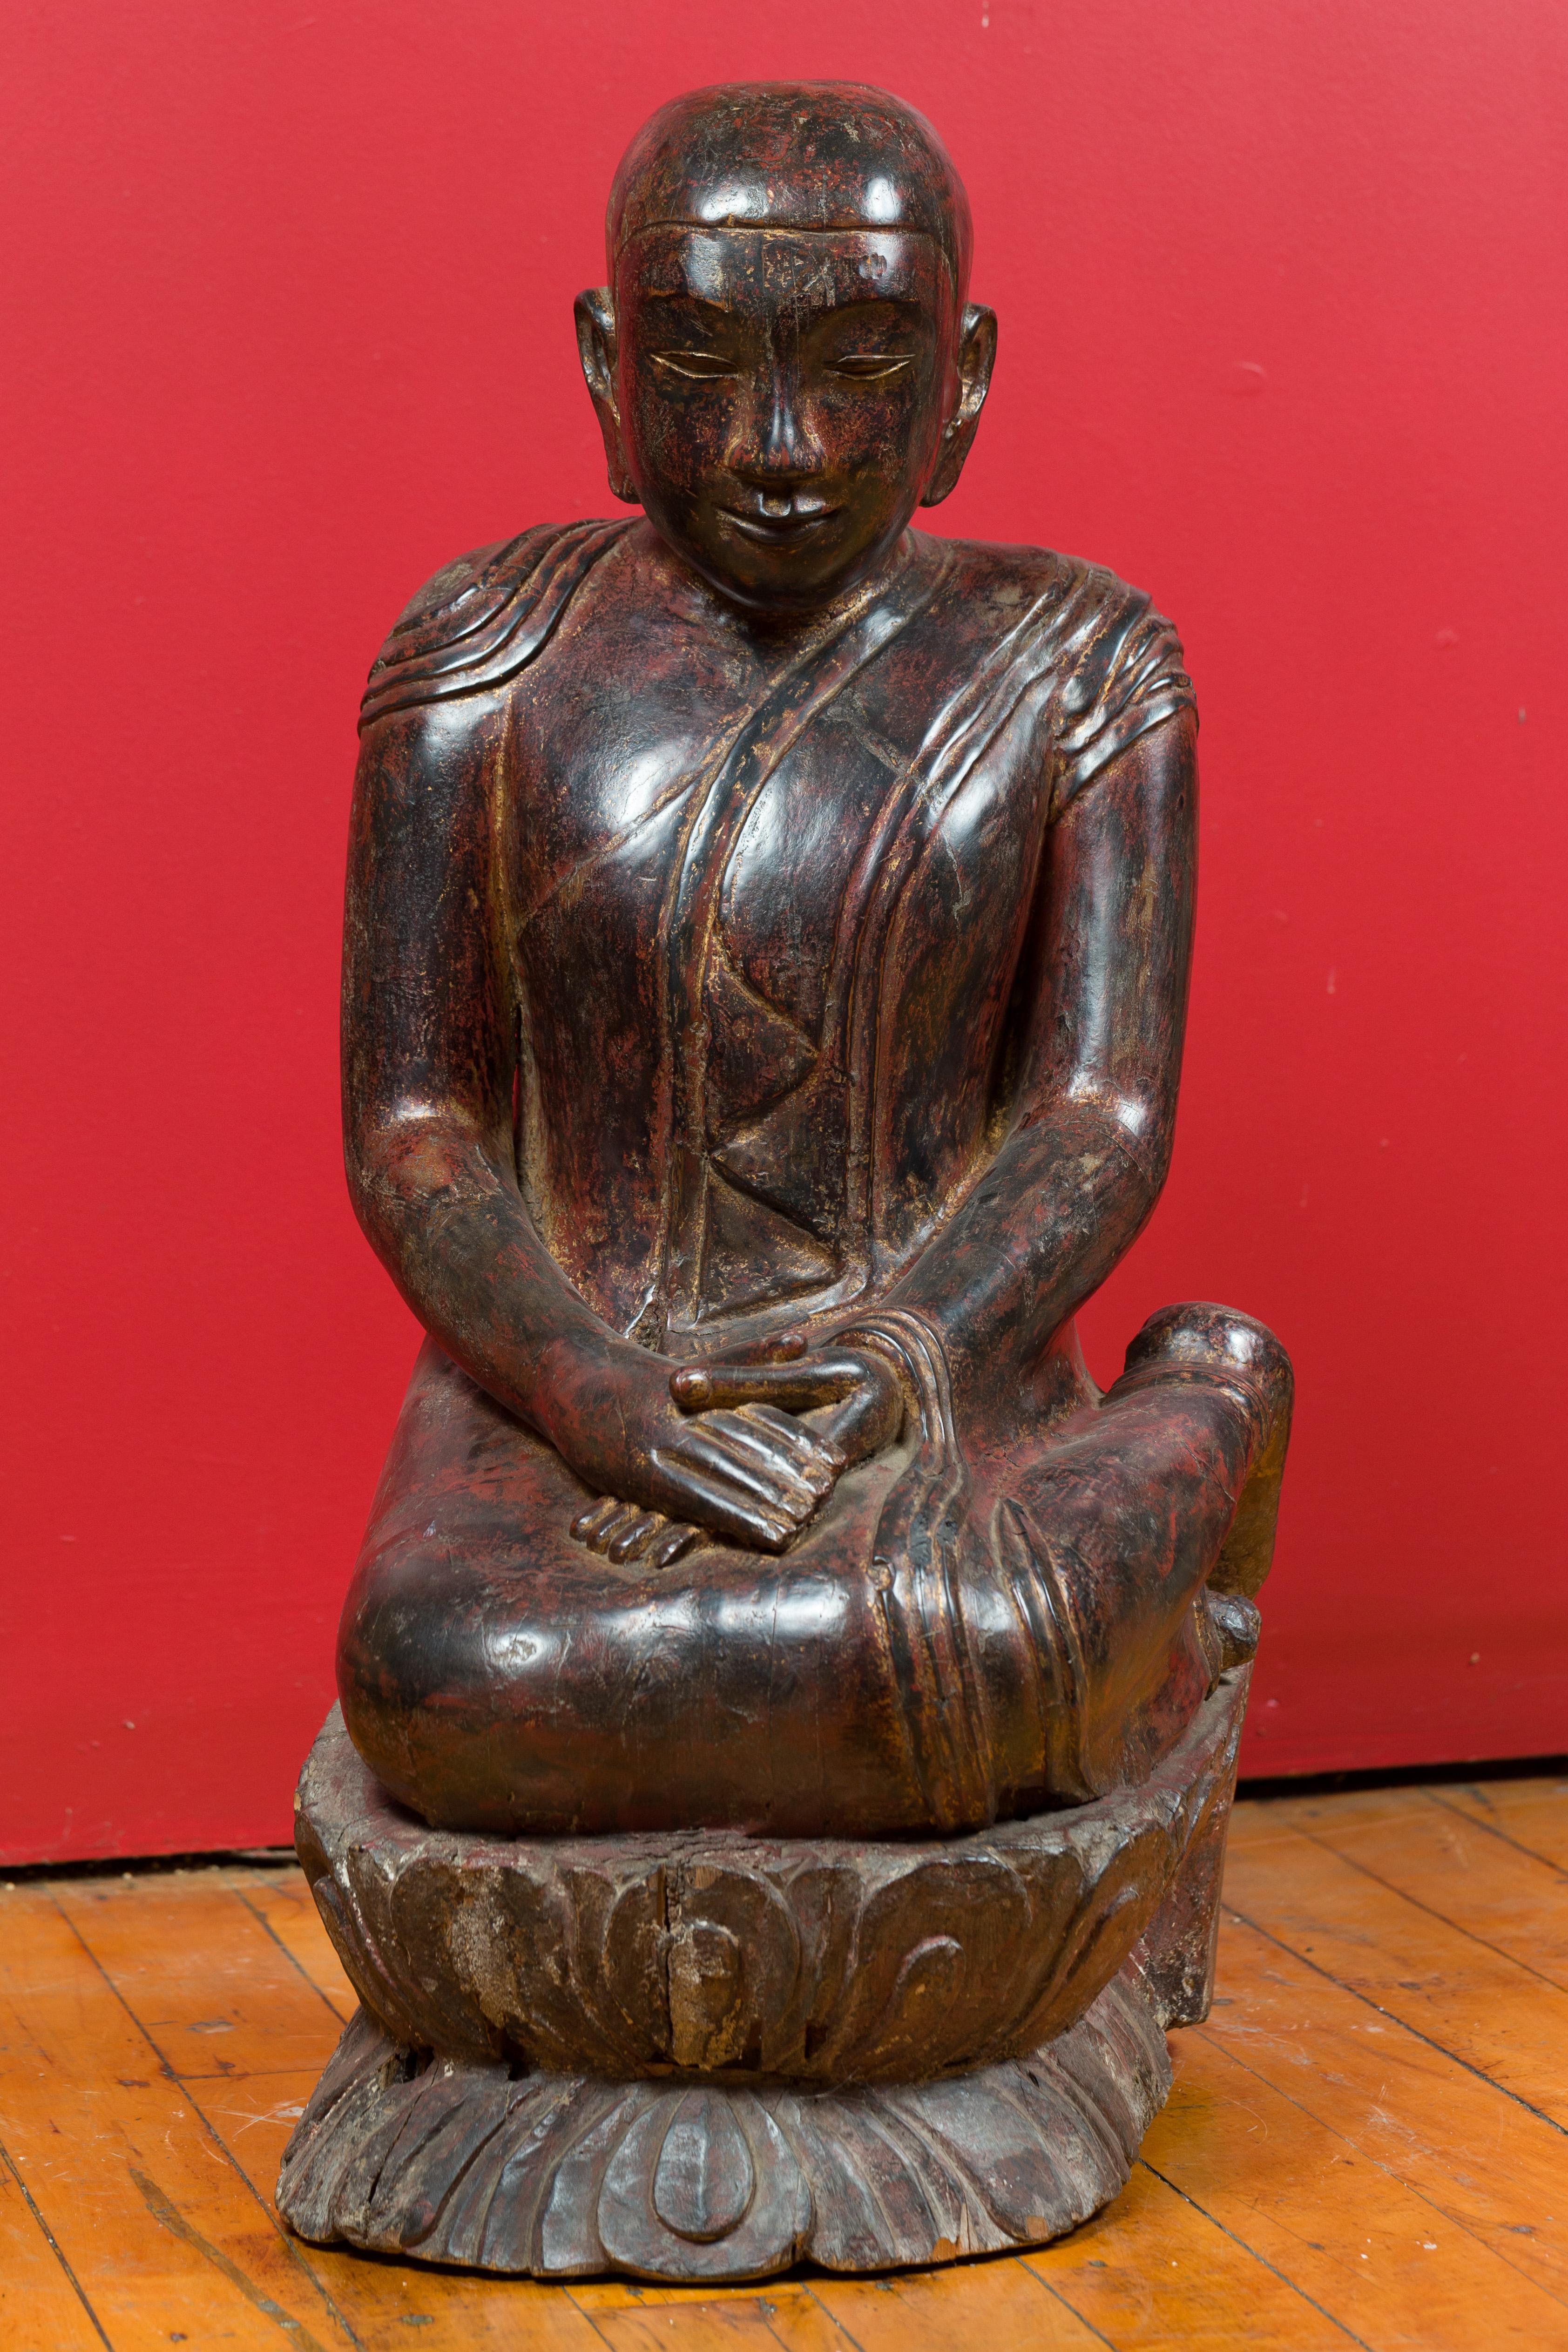 A Thai hand carved lacquered wood sculpture from the 18th century depicting a seated monk. Created in Thailand during the 18th century, this carved statue features a serene seated monk with his hands resting on his knees, his feet to the side. The